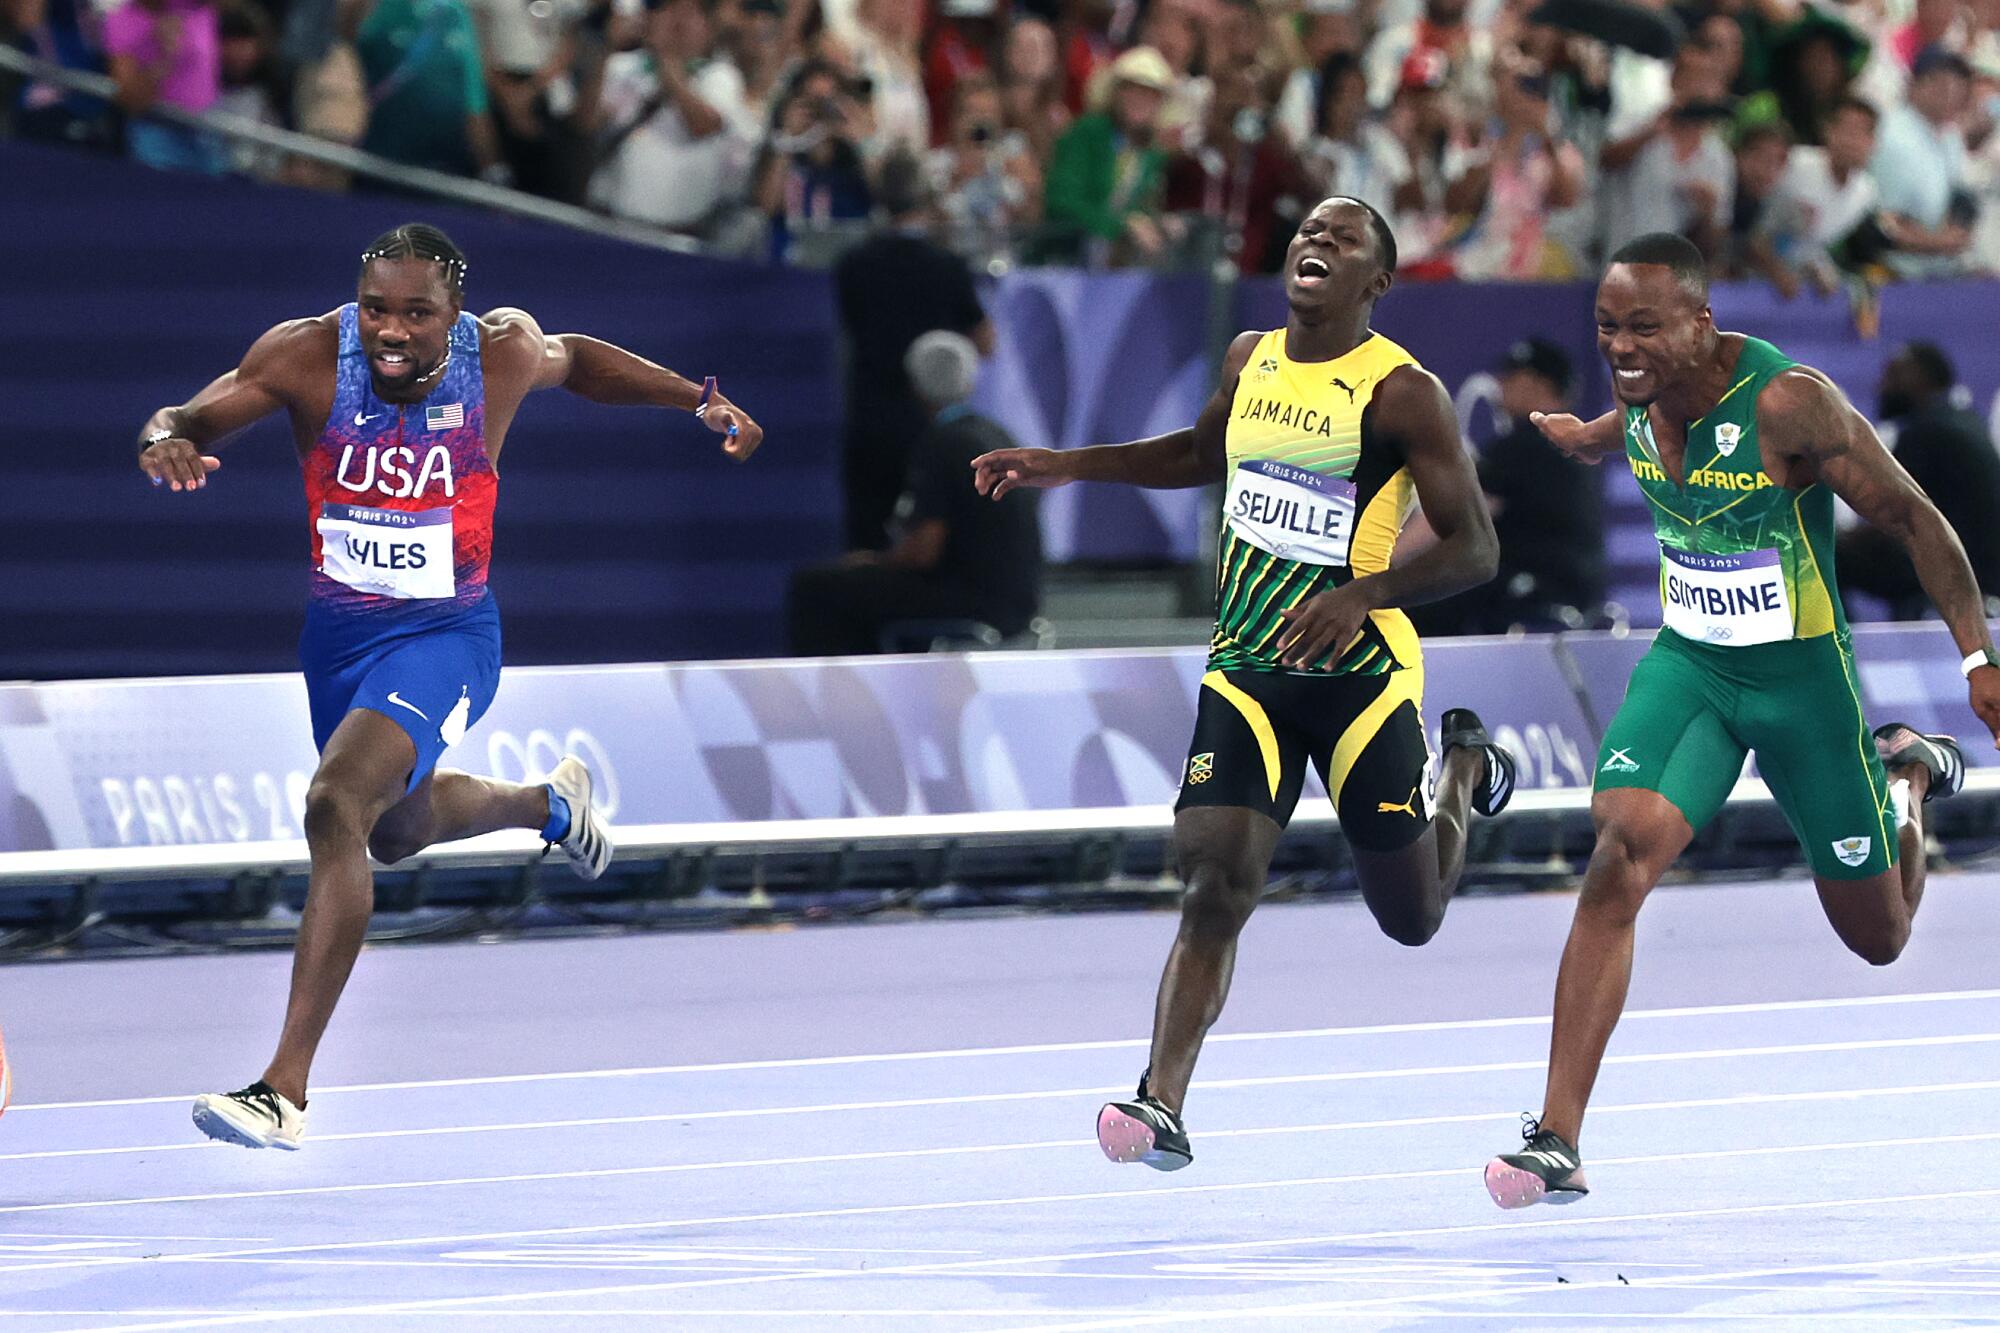 American Noah Lyles, left, crosses the finish line to win gold in the men's 100 meters at the Paris Olympics on Sunday.